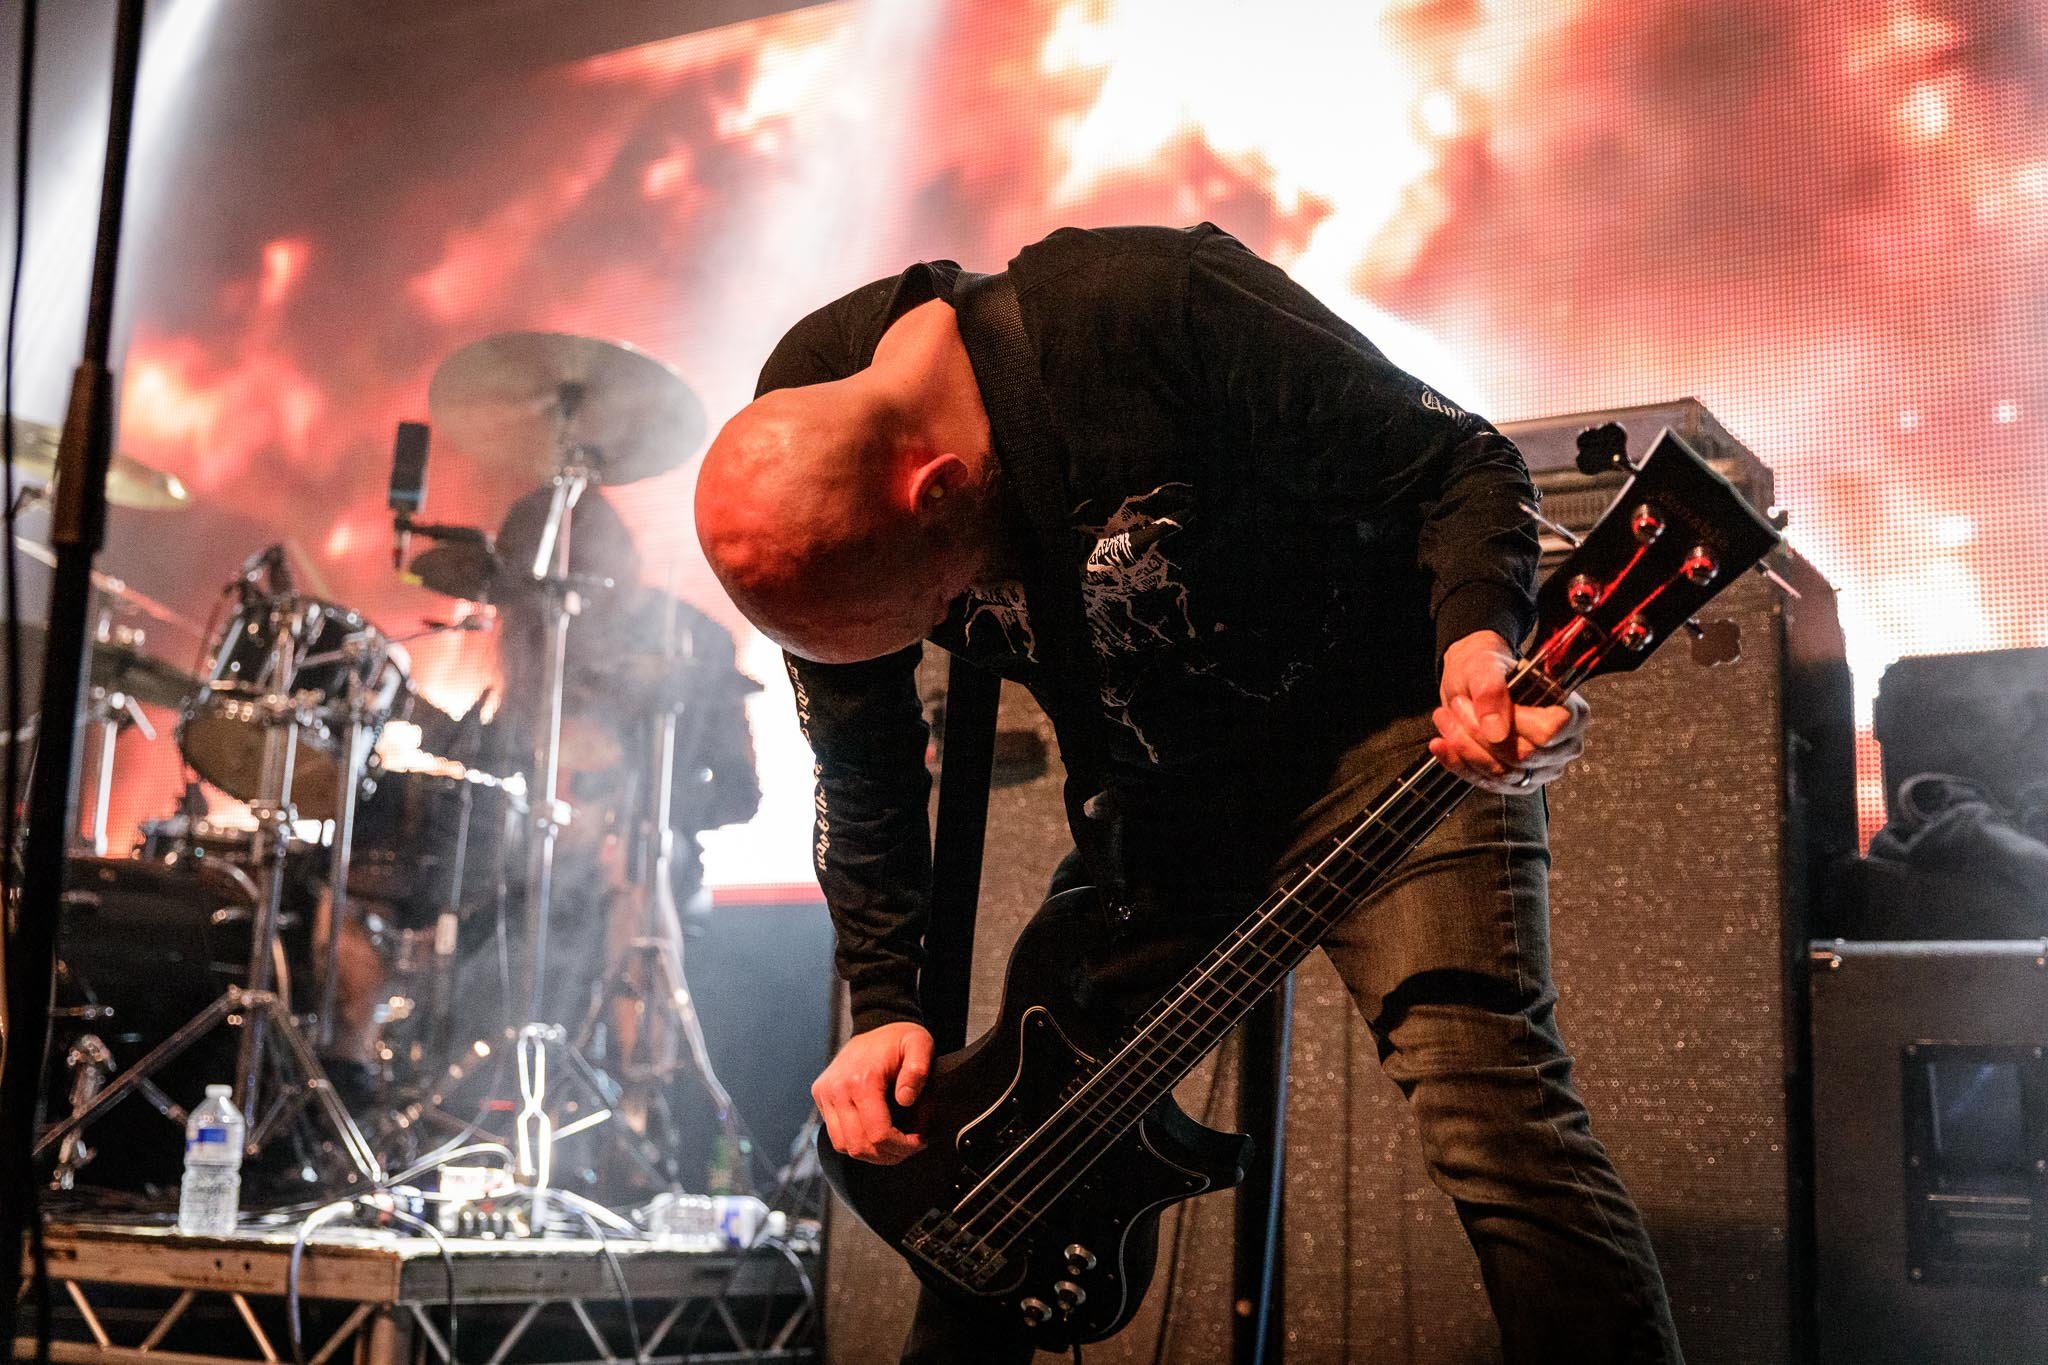 Conan at the Damnation Festival in Leeds on November 6th 2021 ©